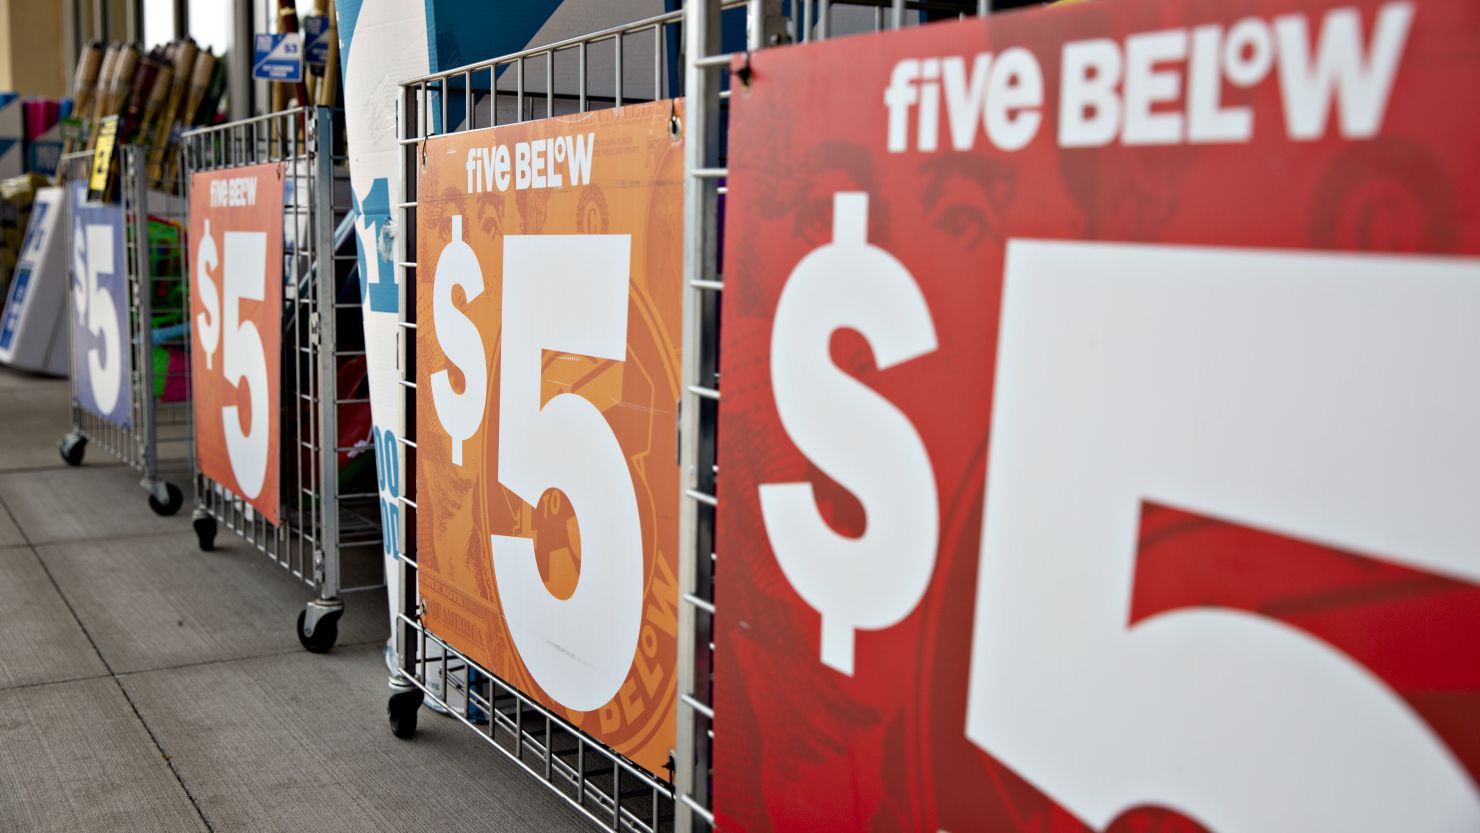 Five Below's Prices Won't All Be Below $5 Anymore - Coupons in the